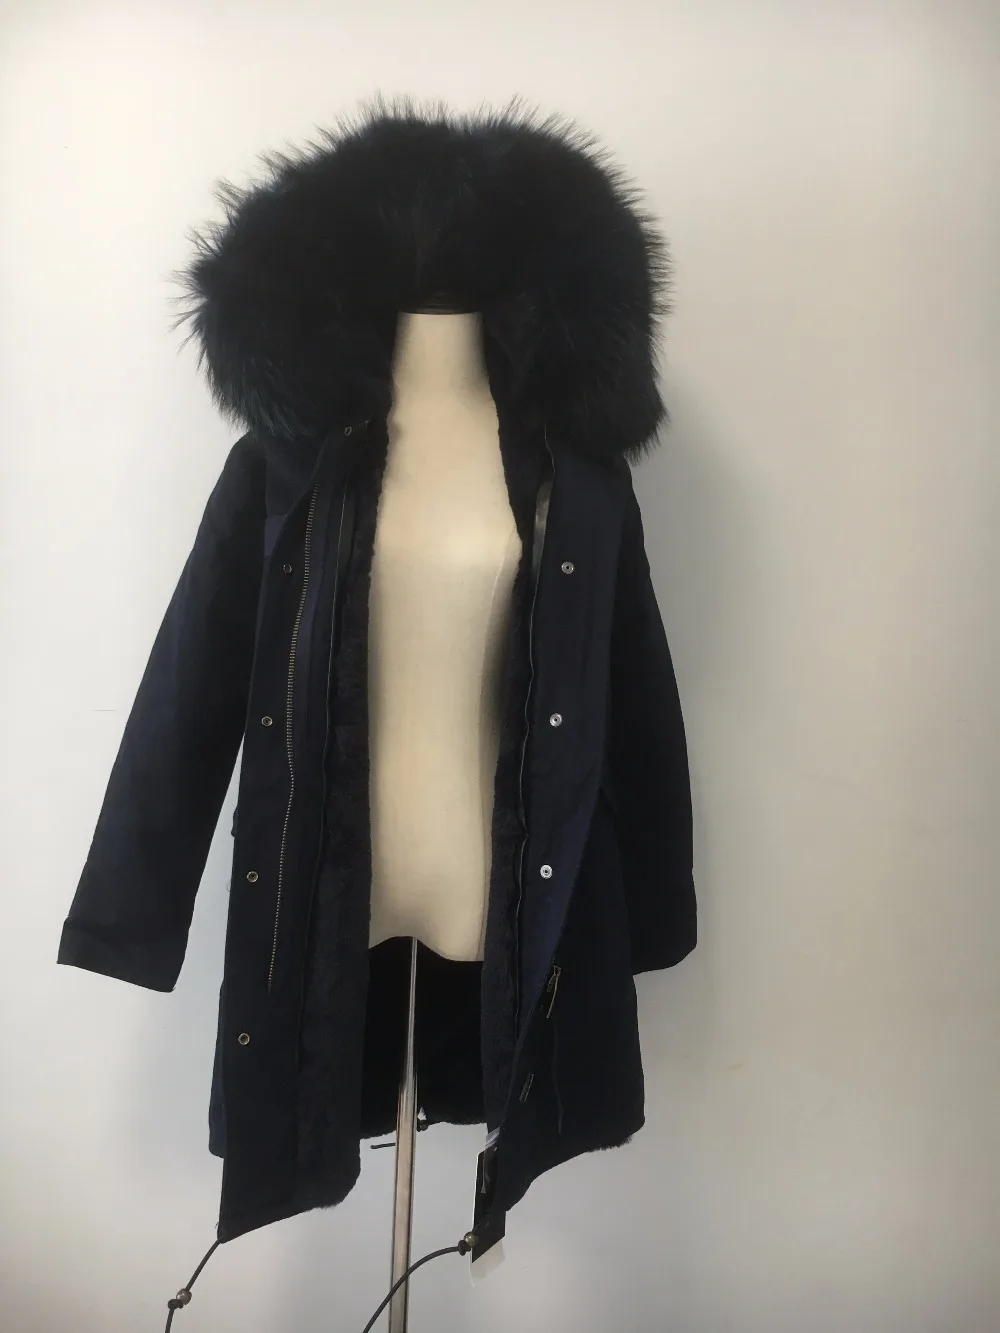 Brand 2017 Women Winter Jacket Long Detachable Lining navy blue Parkas Large Real Raccoon Fur Hooded Coat Outwear images - 6